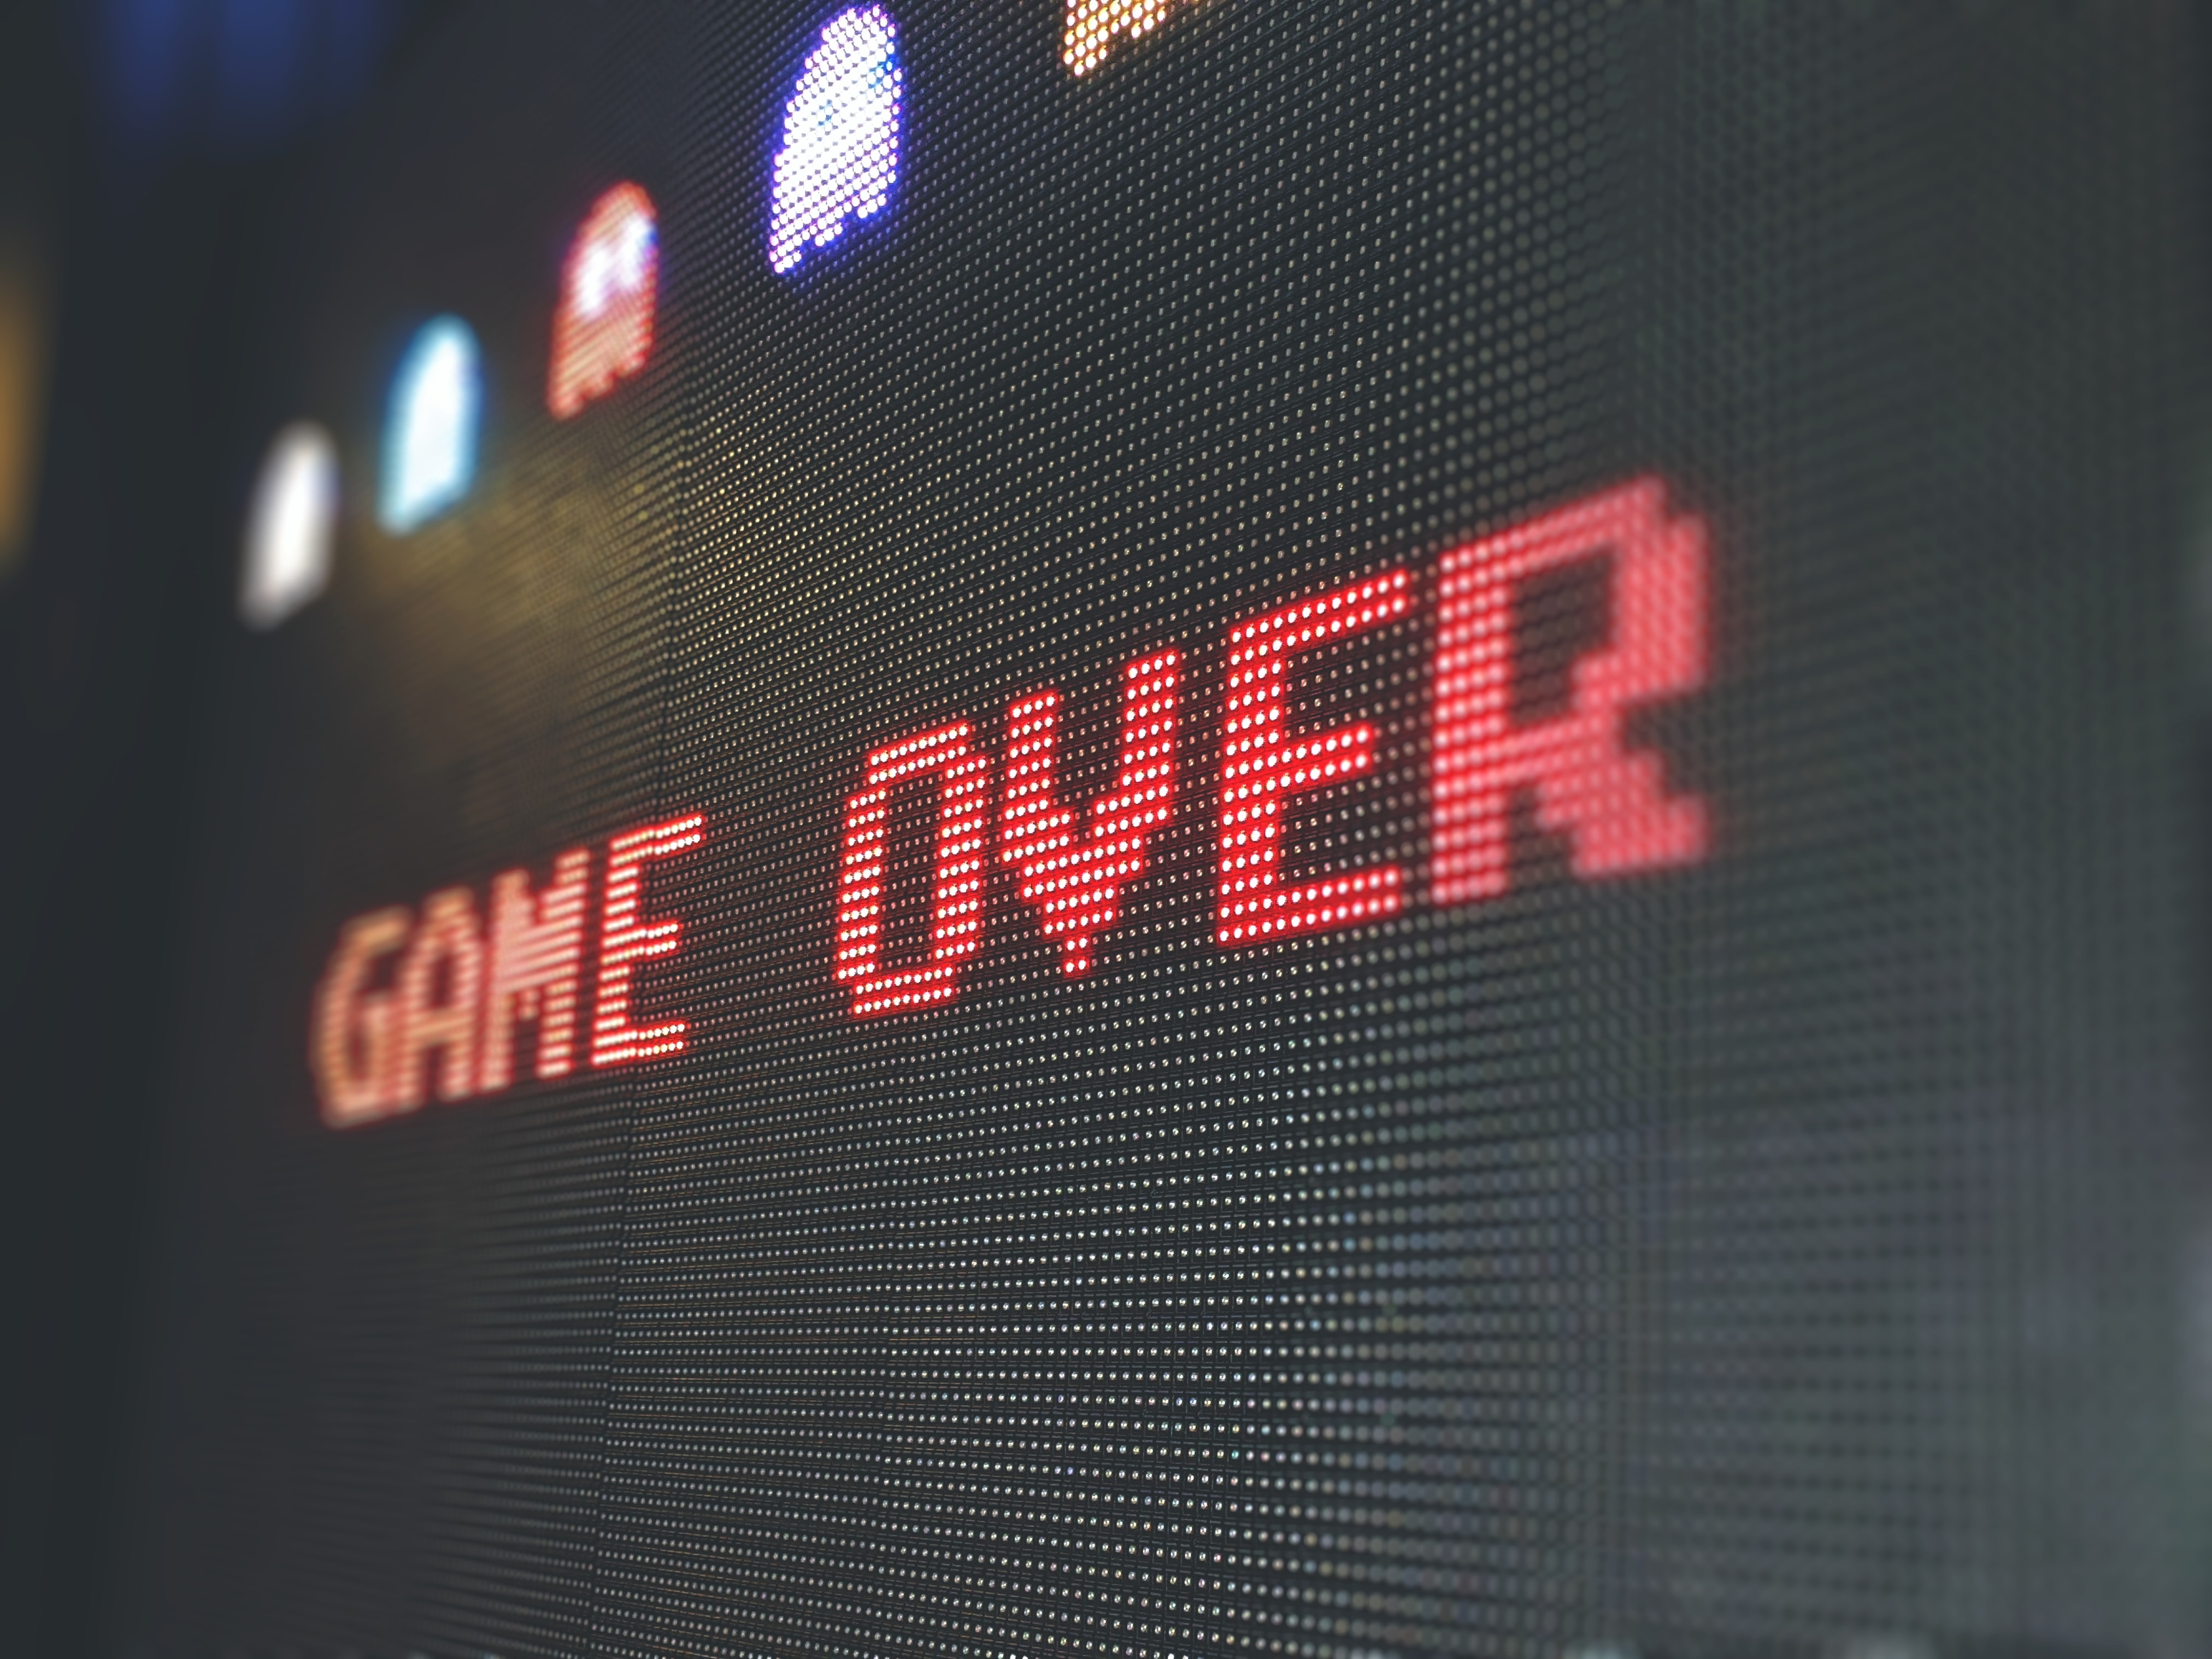 Retro video game font saying "Game Over" displayed on screen